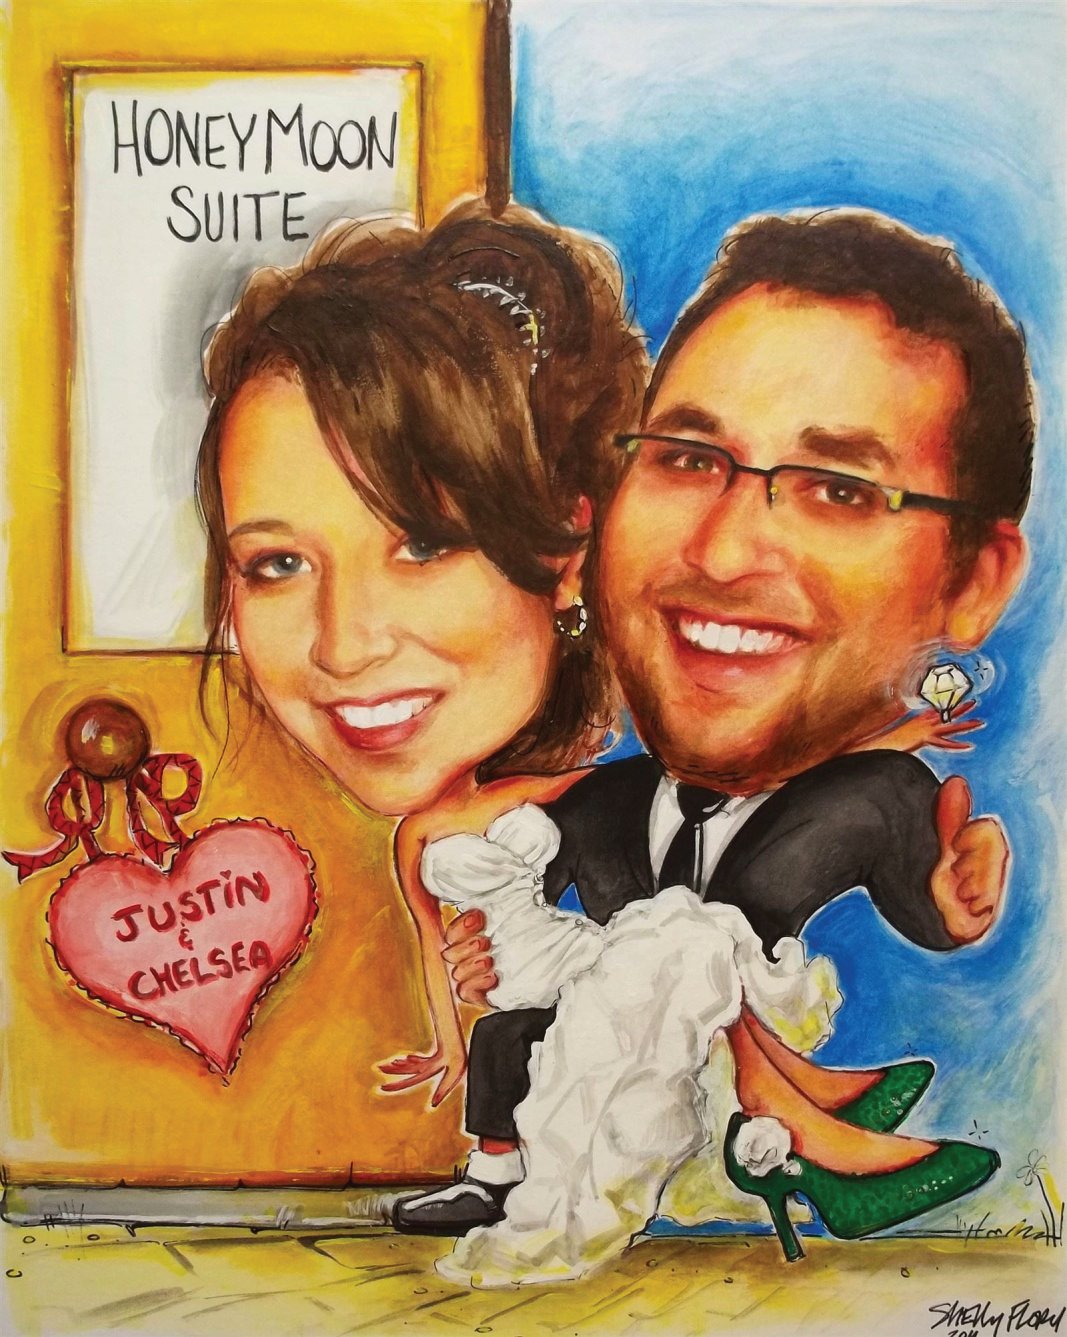 wedding caricature painted for a gift in full color.